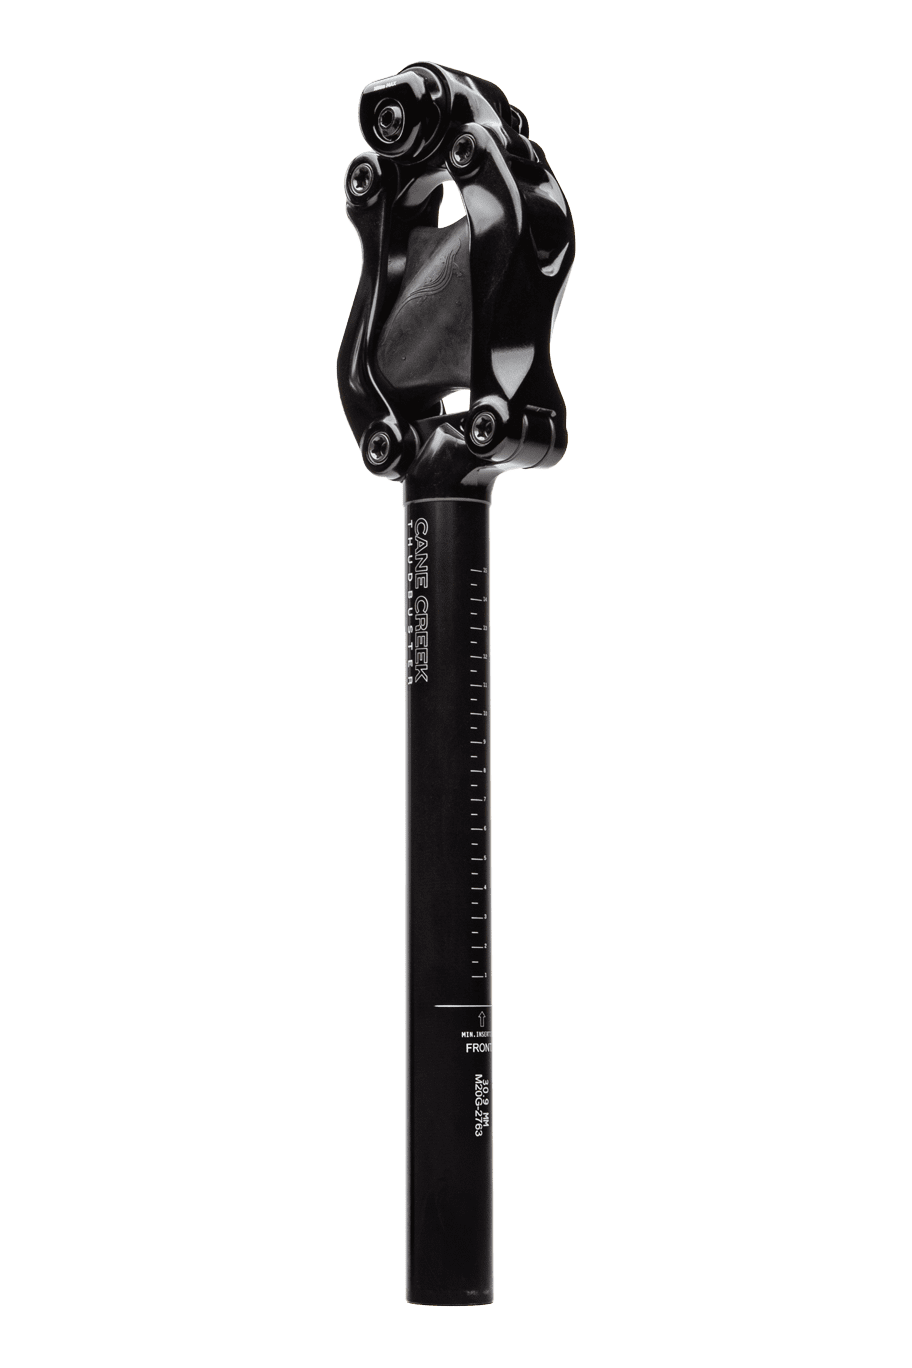 Cane Creek Thudbuster Short Travel Seatpost 31.6 Newest Version